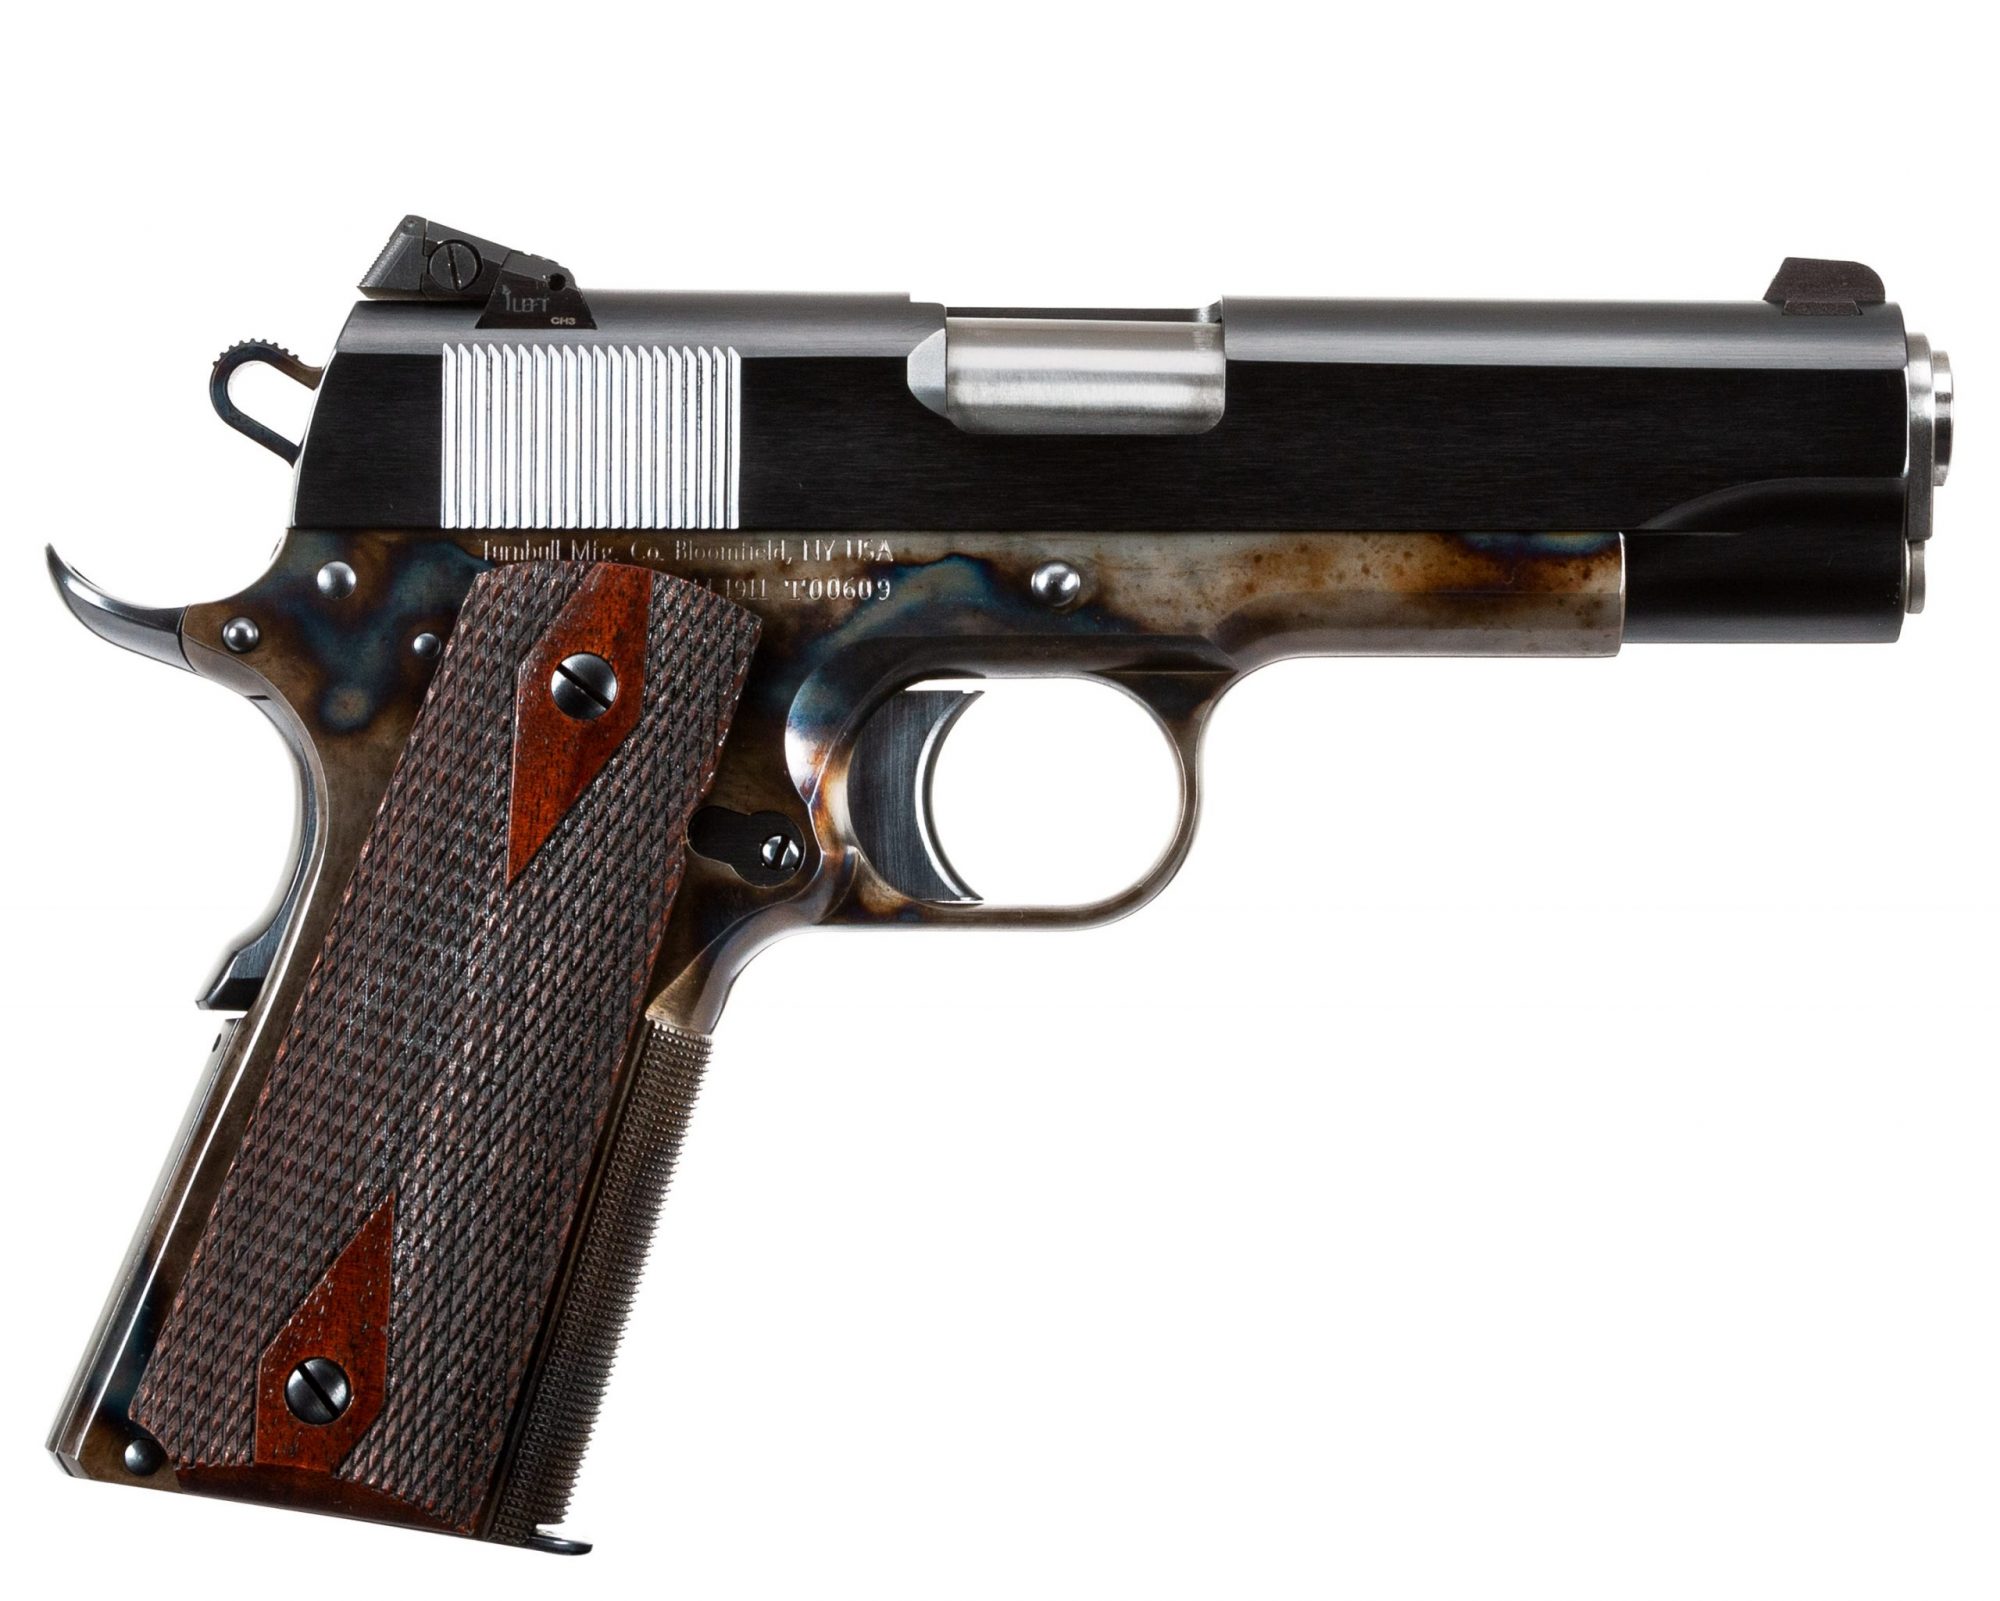 Photo of a new Turnbull Model 1911 Commander, featuring bone charcoal color case hardening